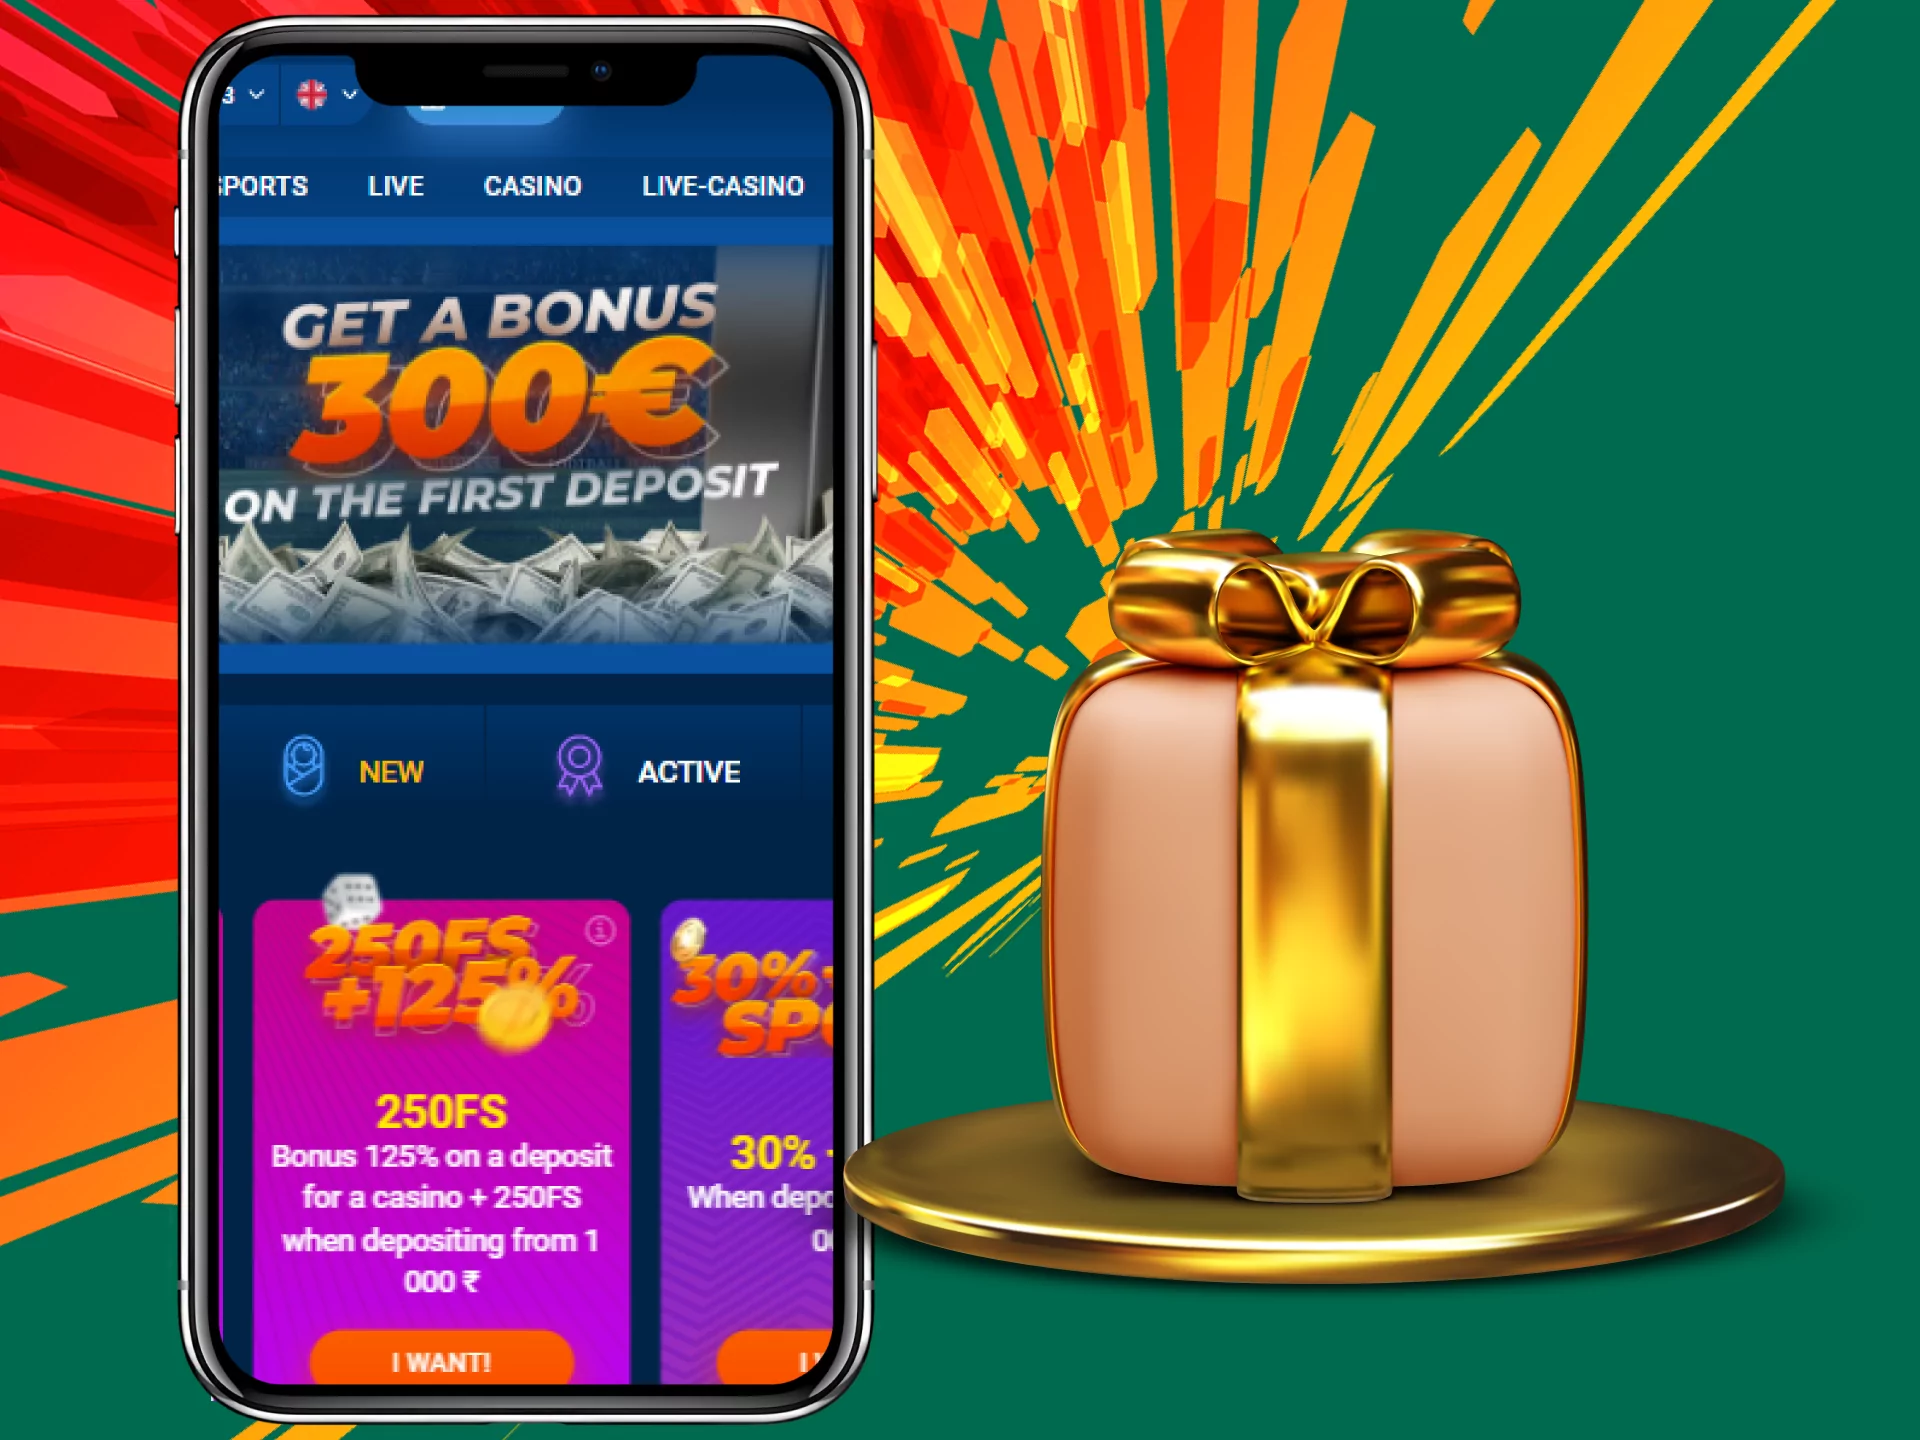 You can get additional bonuses from Mostbet as a gift on your birthday.